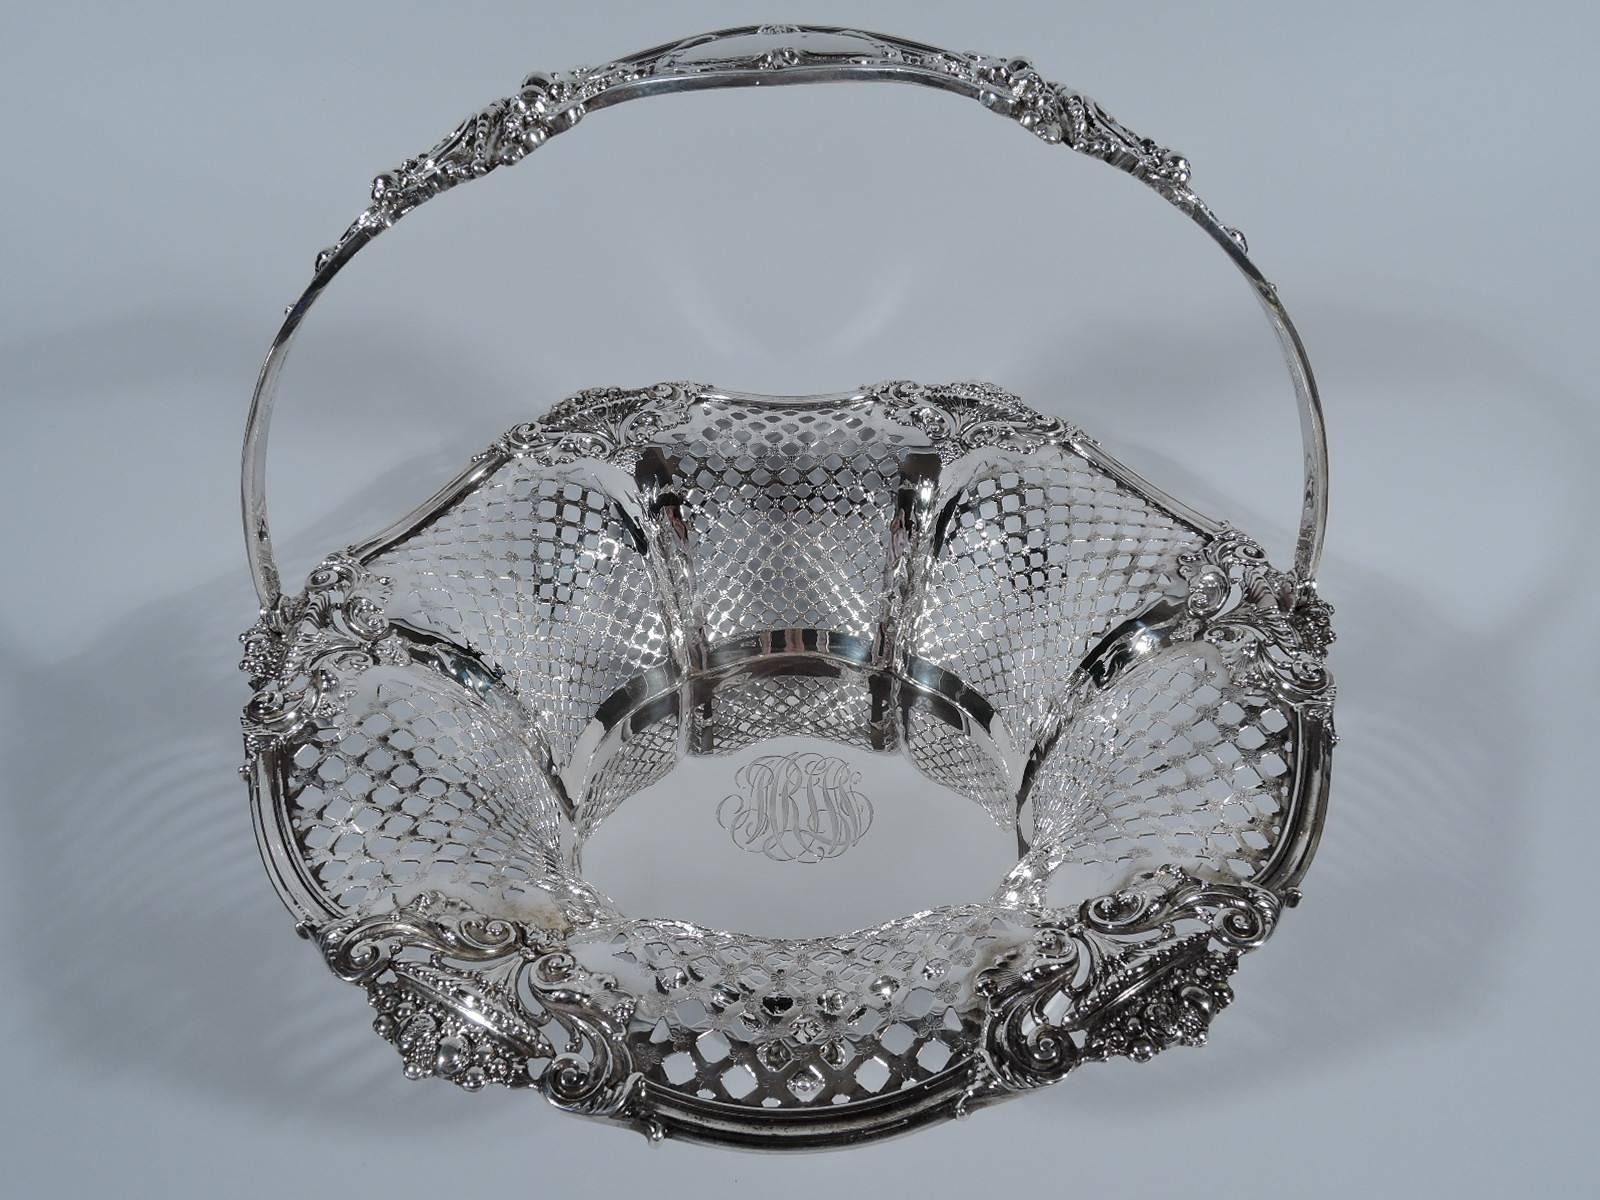 Edwardian sterling silver basket. Made by Black, Starr & Frost in New York, circa 1910. Solid and round shaped well engraved with interlaced script monogram. Flared sides with pierced diaper ornament. Molded wavy rim with cornucopias. Pierced swing